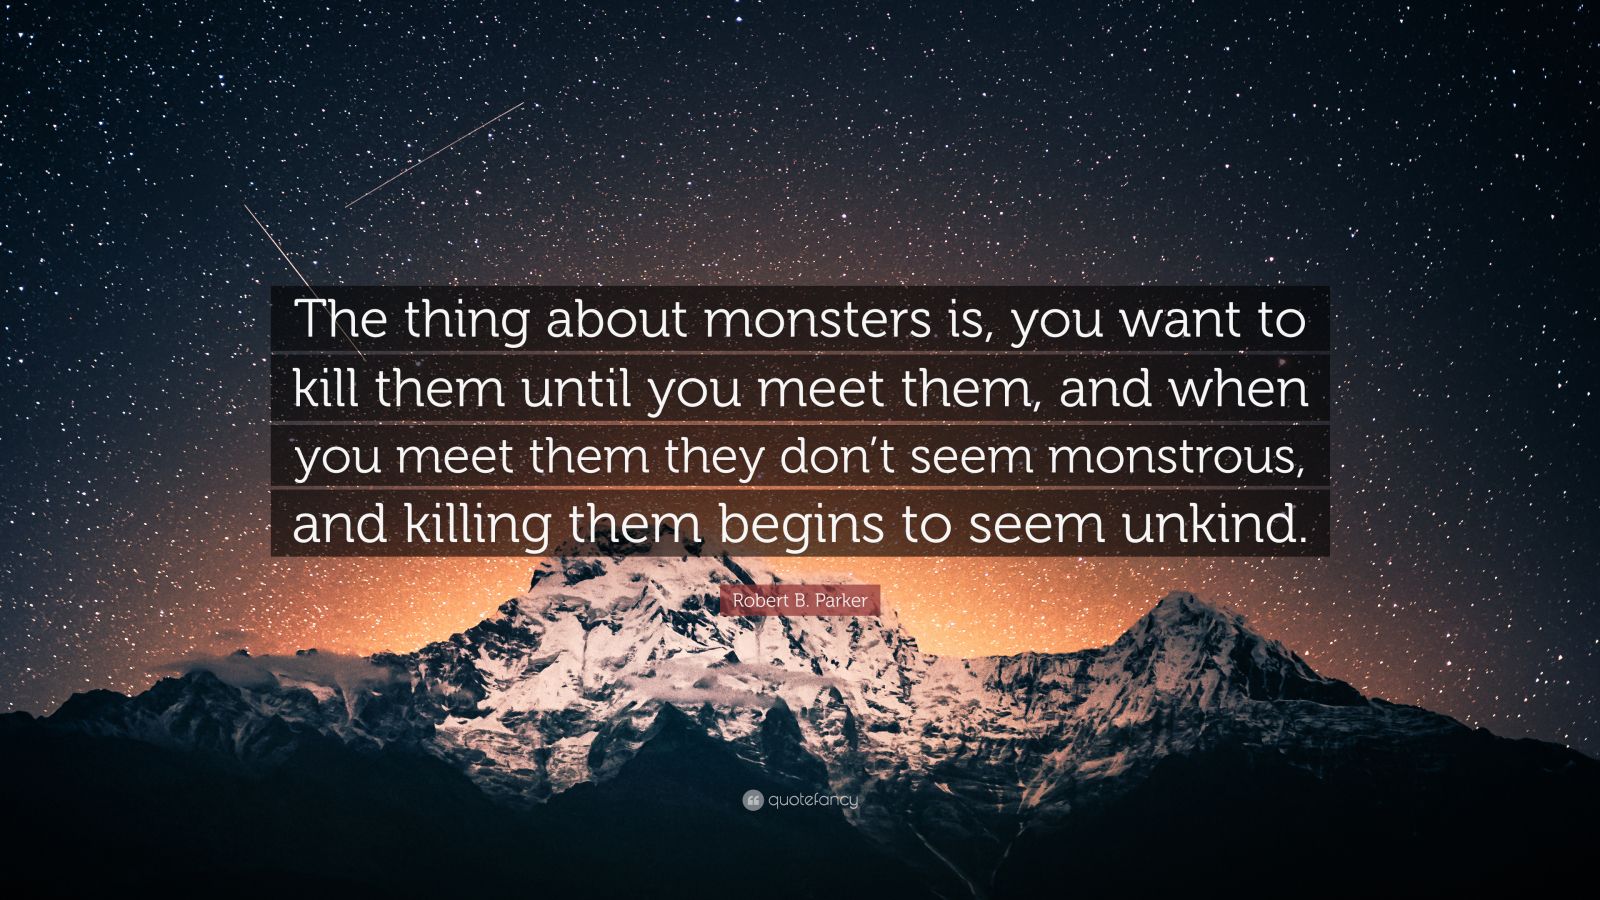 From: What Are The Monsters & What Do They Want?